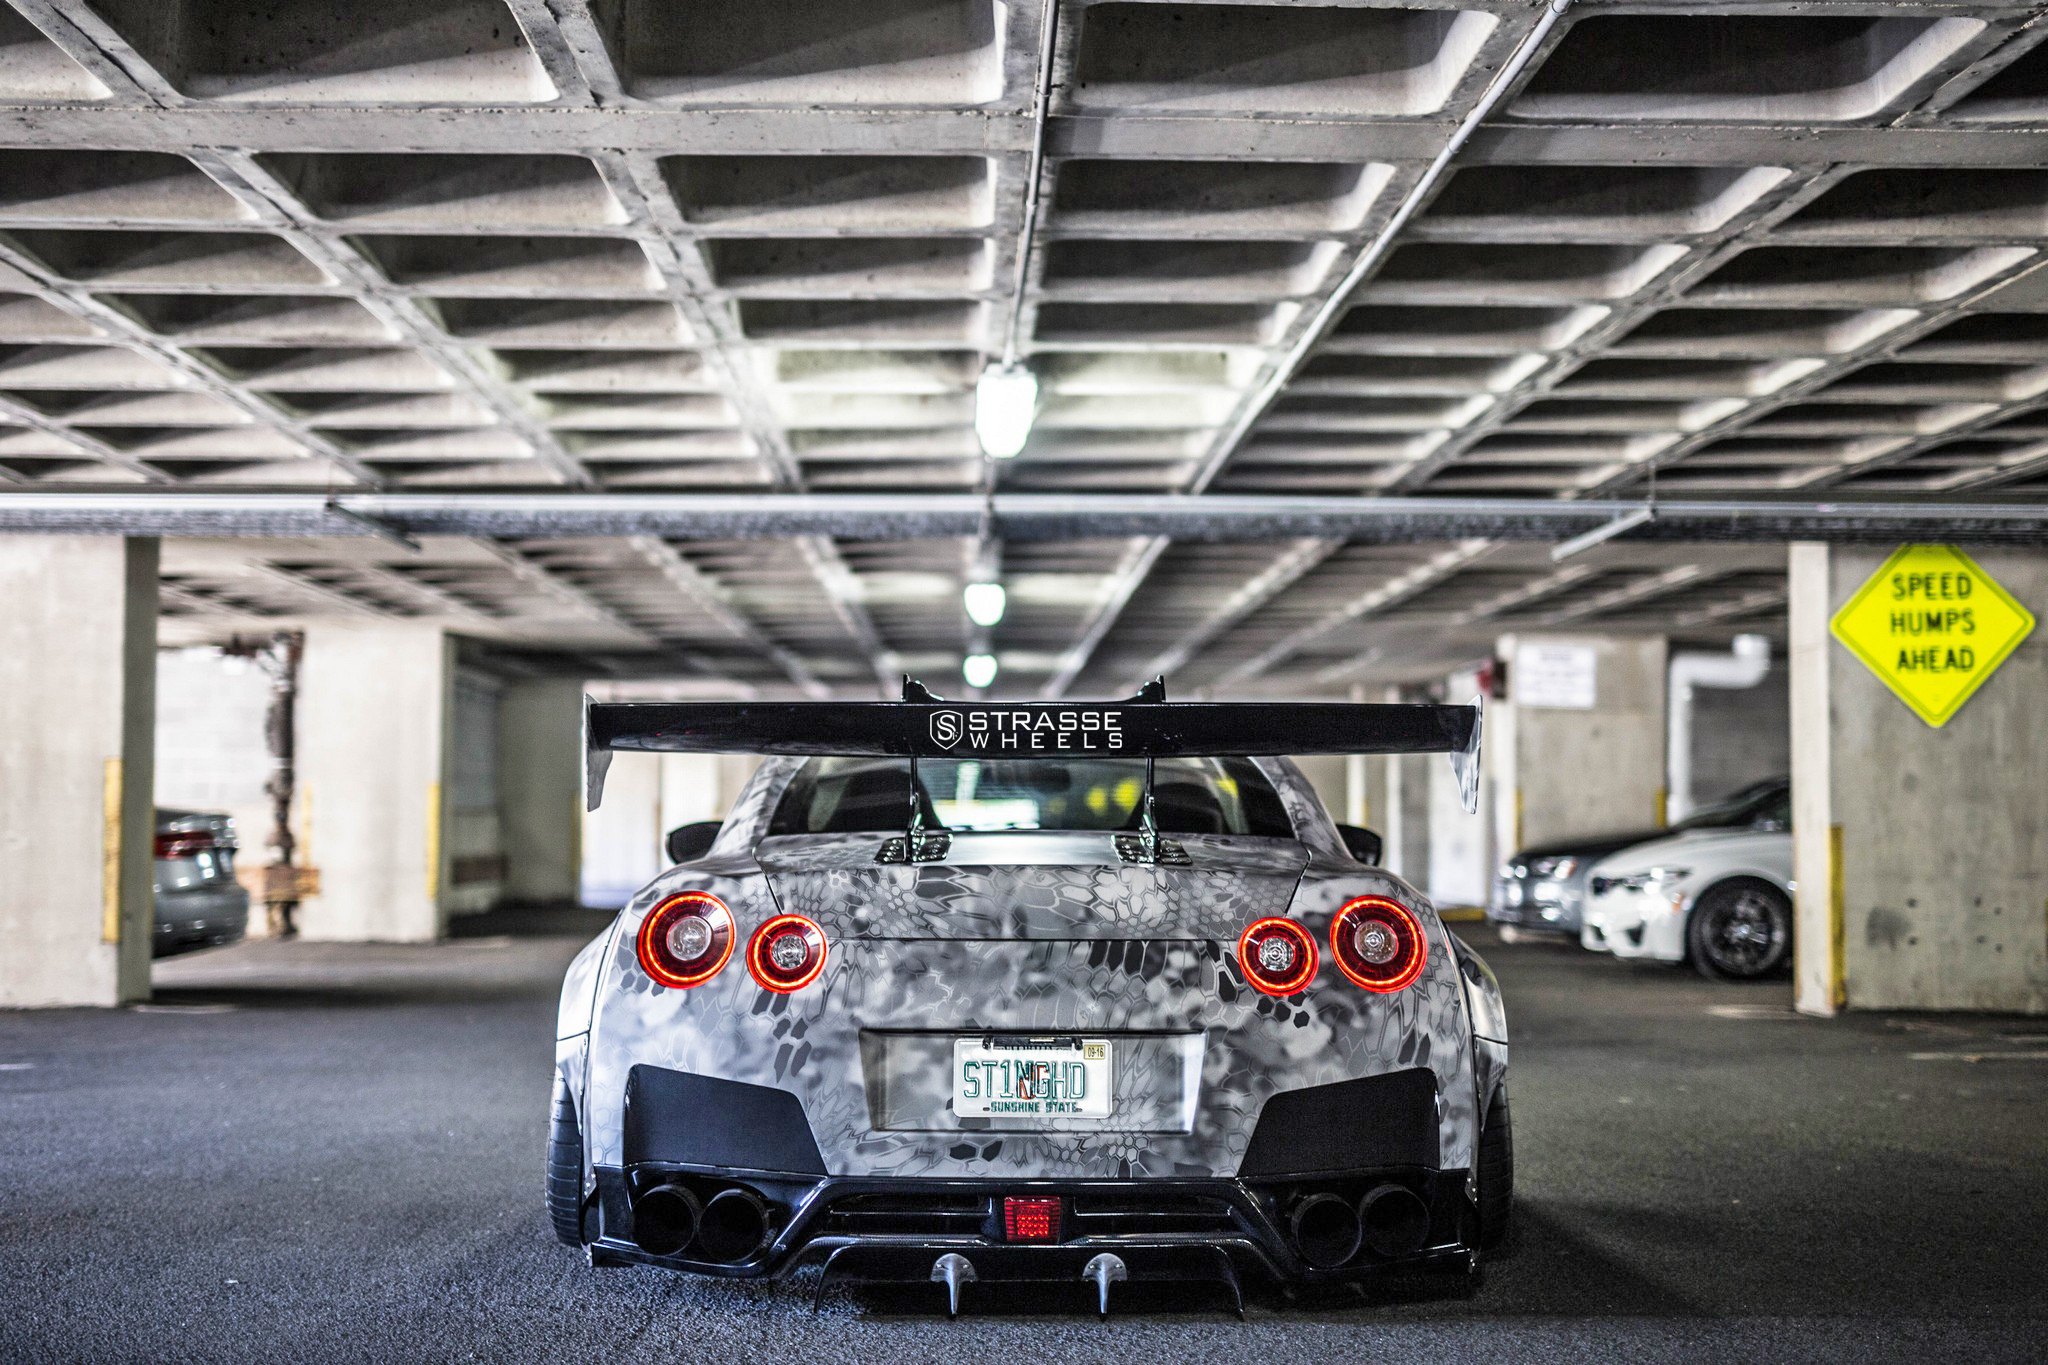 Aftermarket Rear Diffuser on Nissan GT-R - Photo by Strasse Forged